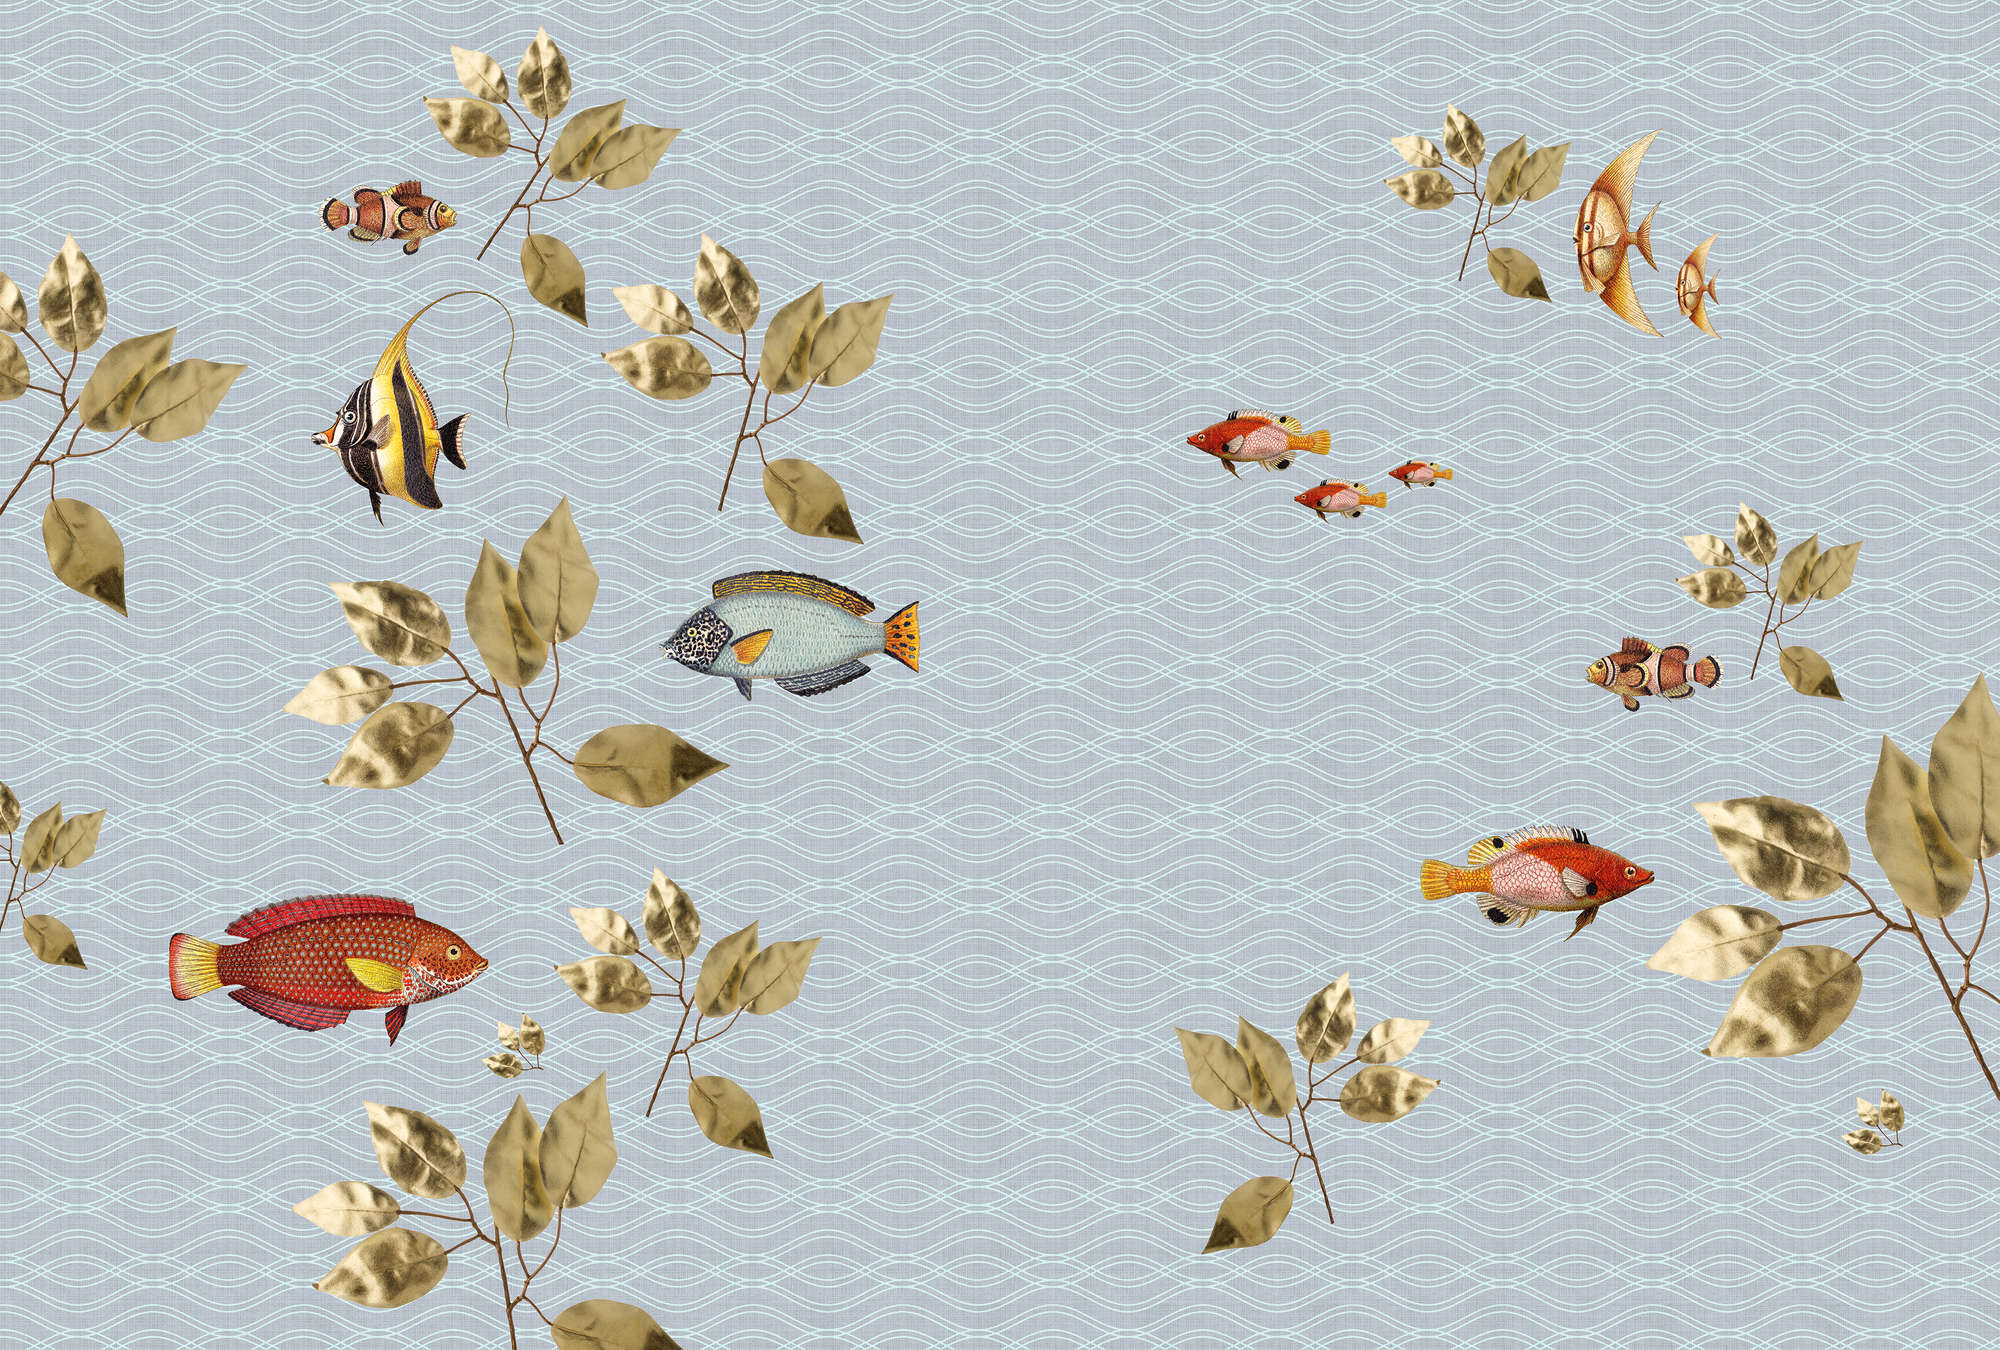             Brilliant fish 1 - Flying fish wallpaper in natural linen structure - Blue | Structure non-woven
        